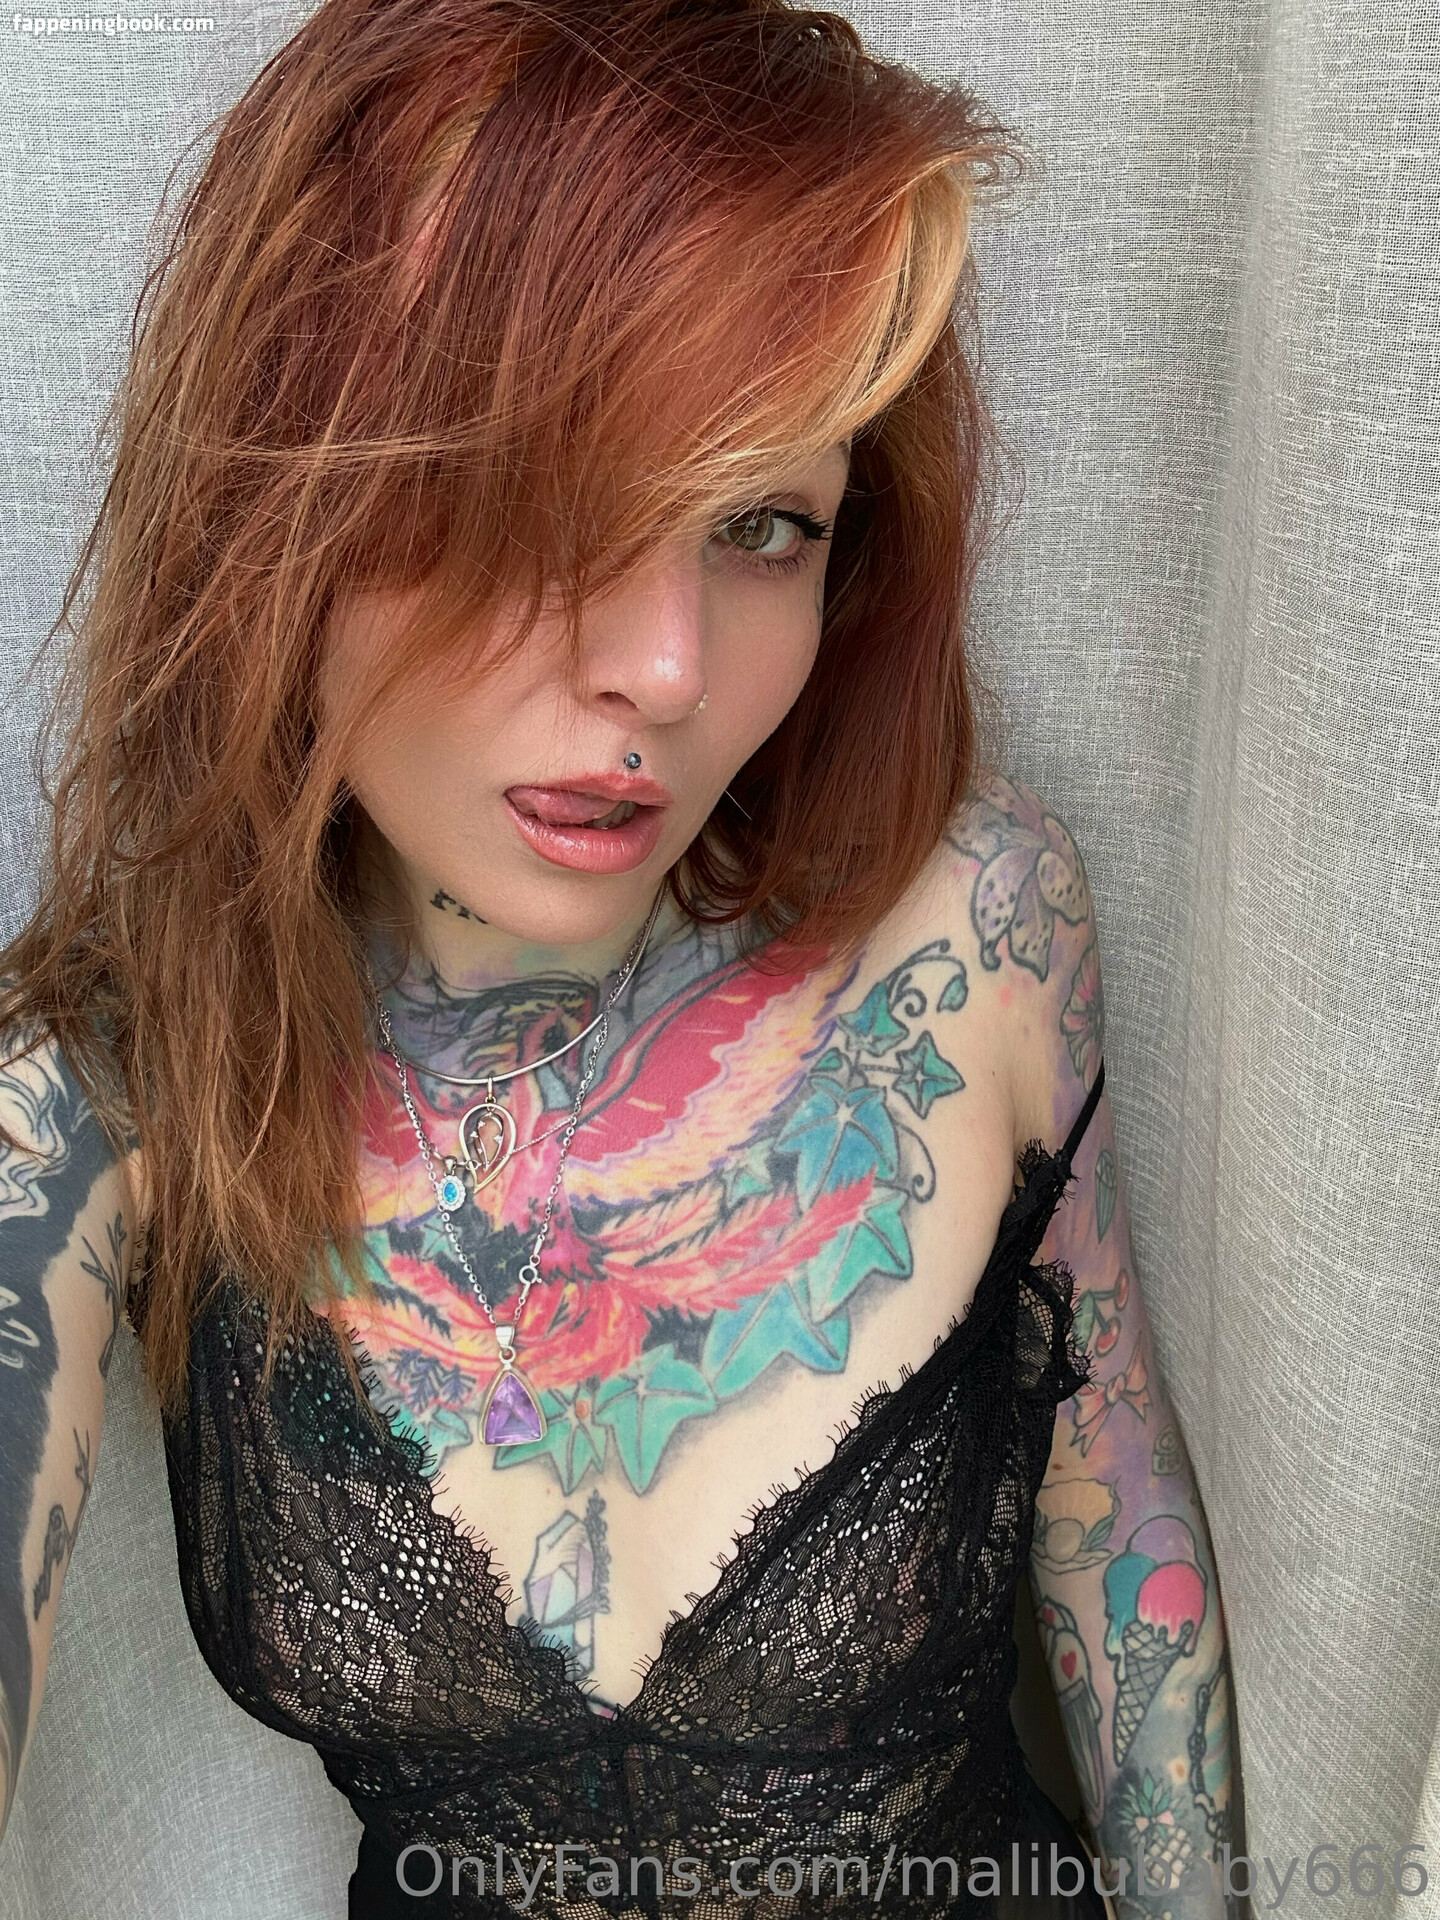 malibubaby666 Nude OnlyFans Leaks